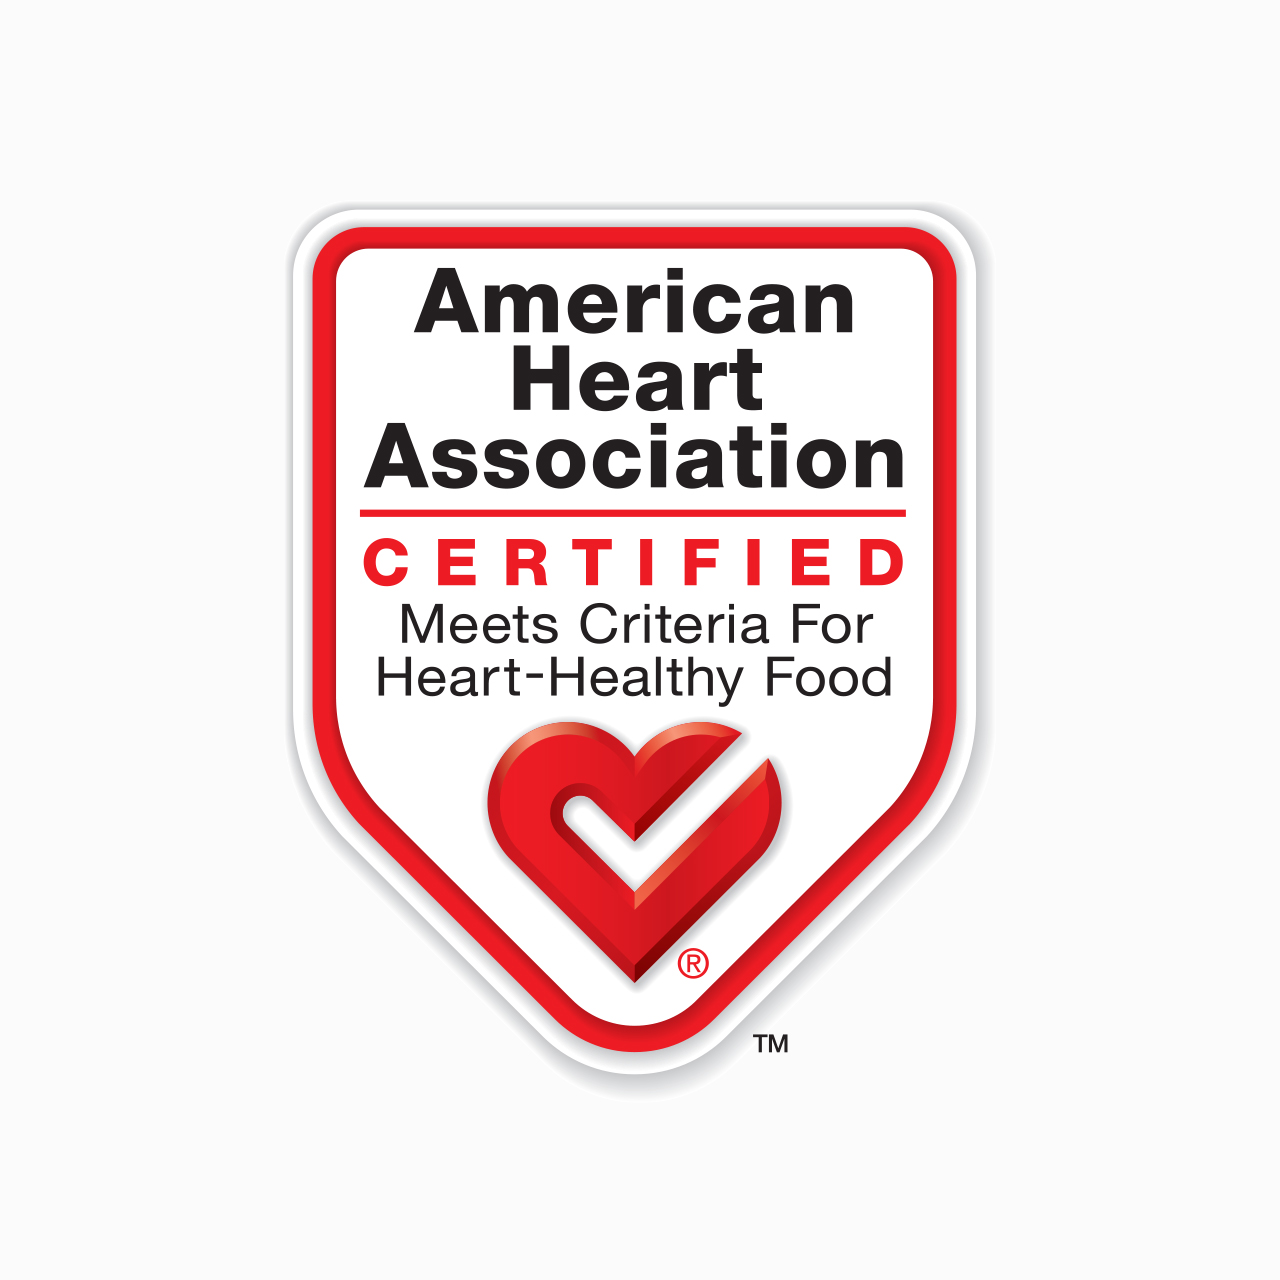 American Heart Association's logo badge for healthy foods